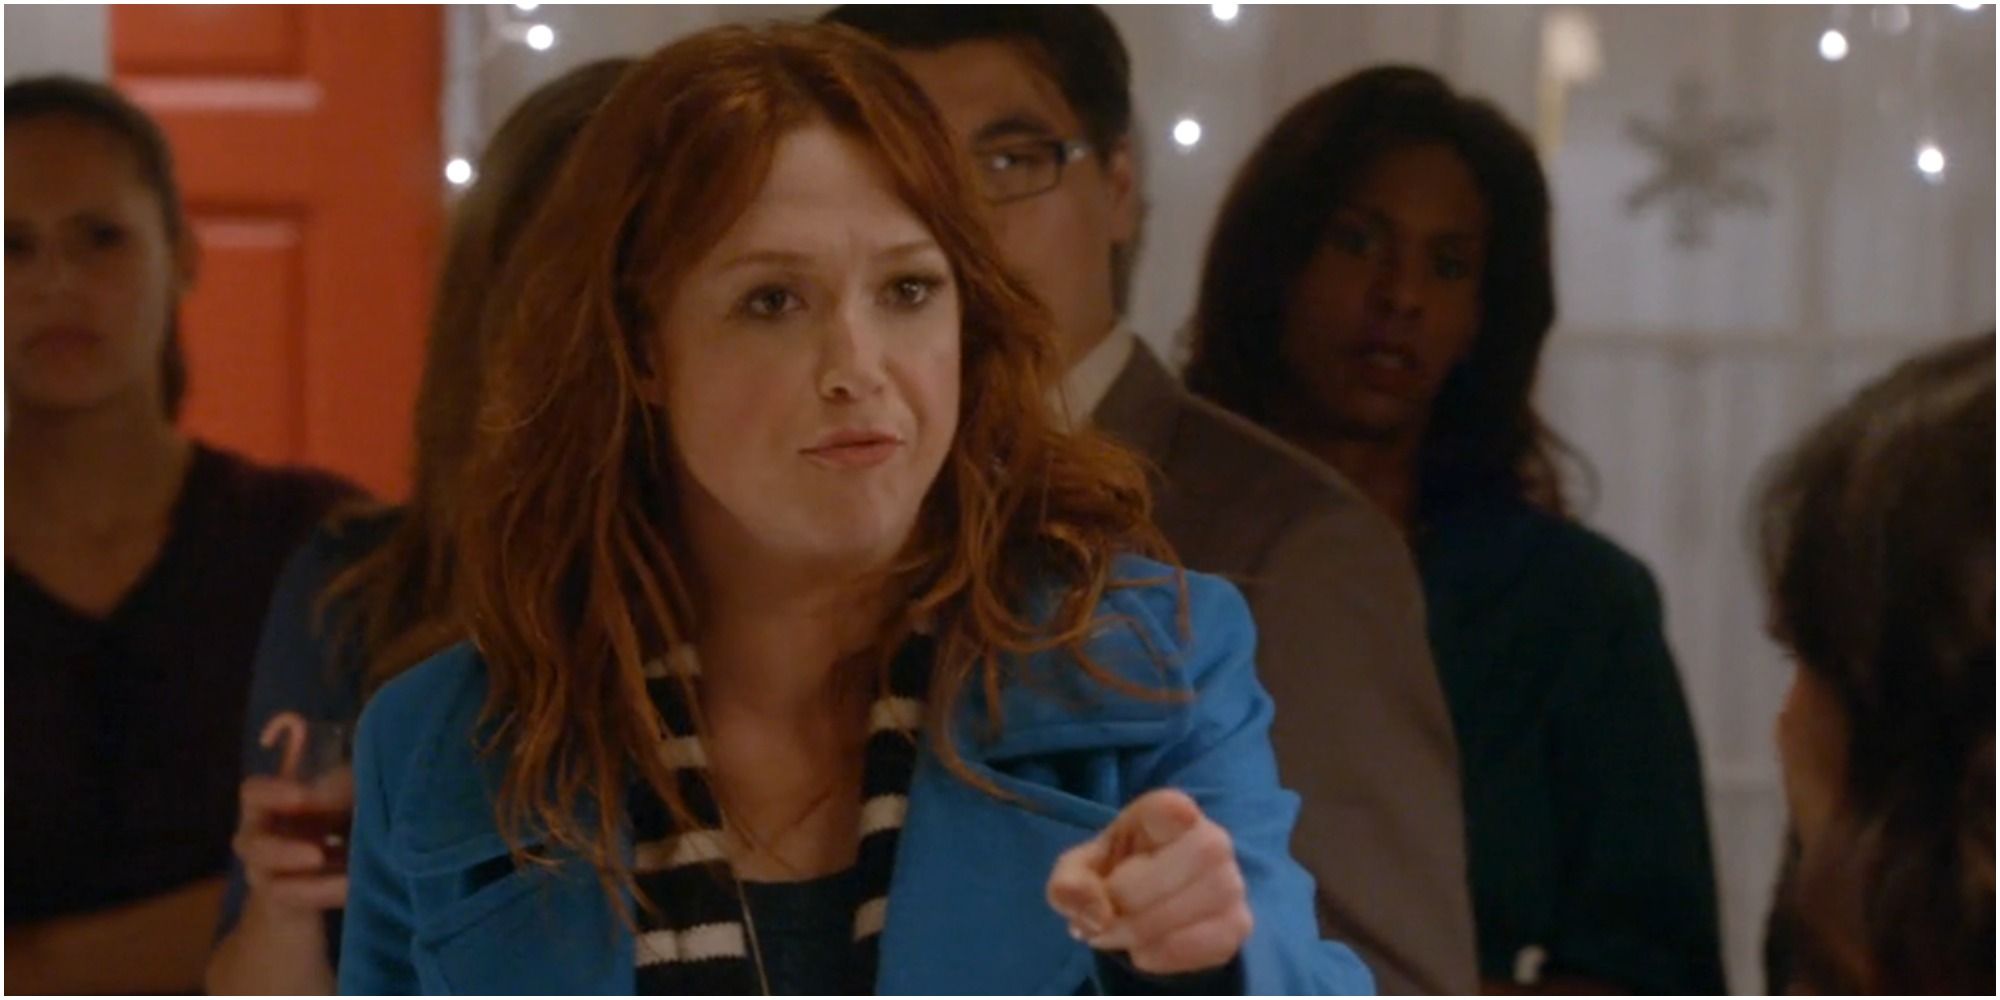 A screenshot of Ellie Kemper as Heather in The Mindy Project